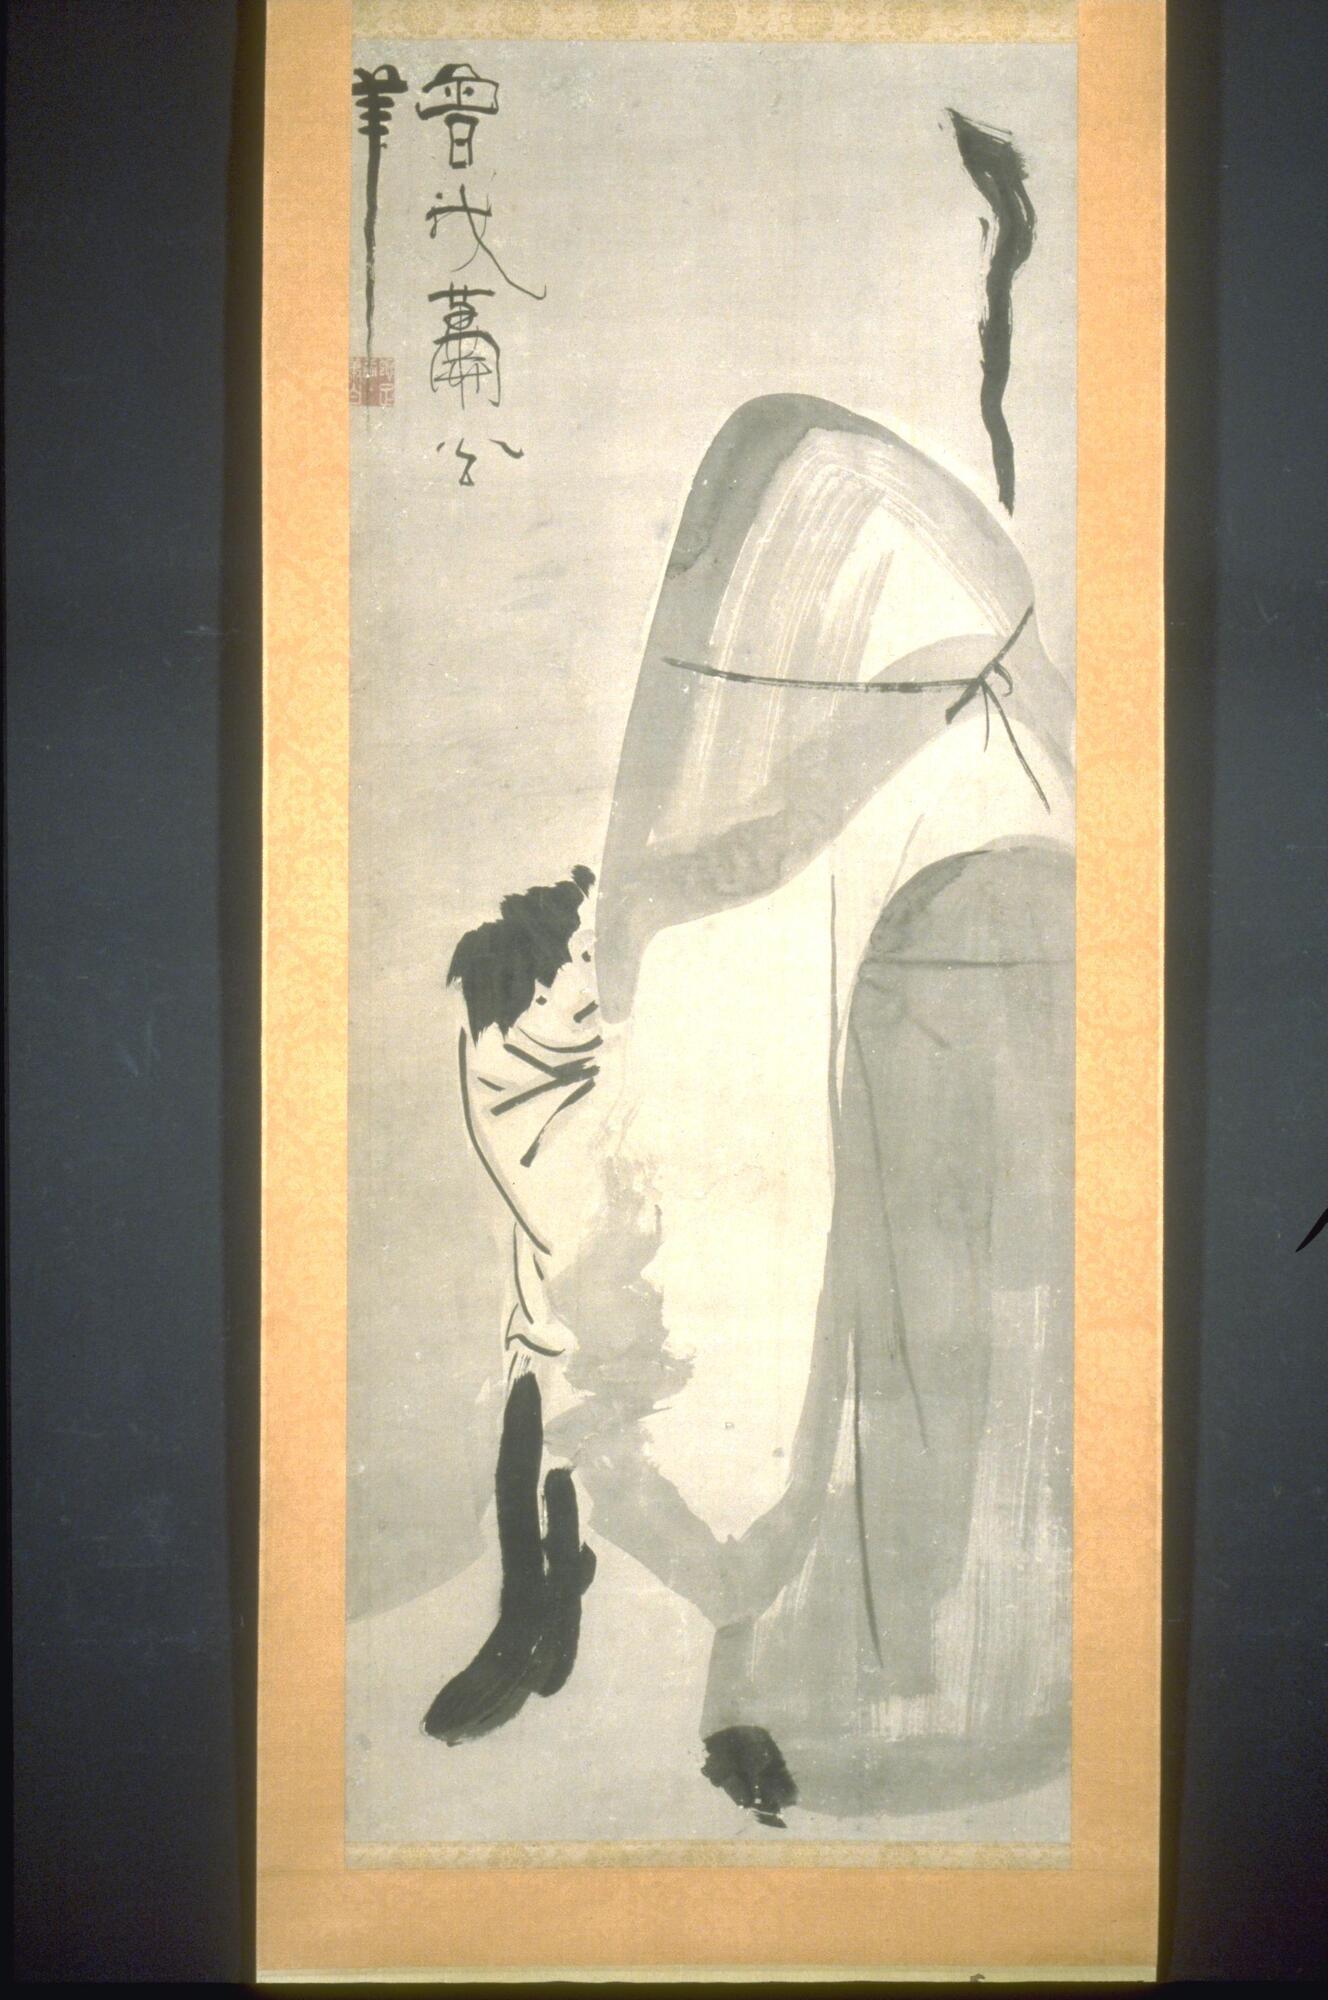 This hanging scroll depicts two figures, one with with a head covering and billowing robes holding a staff, and a shorter figure looking out towards the viewer. An inscription is placed in the upper left corner of the image.